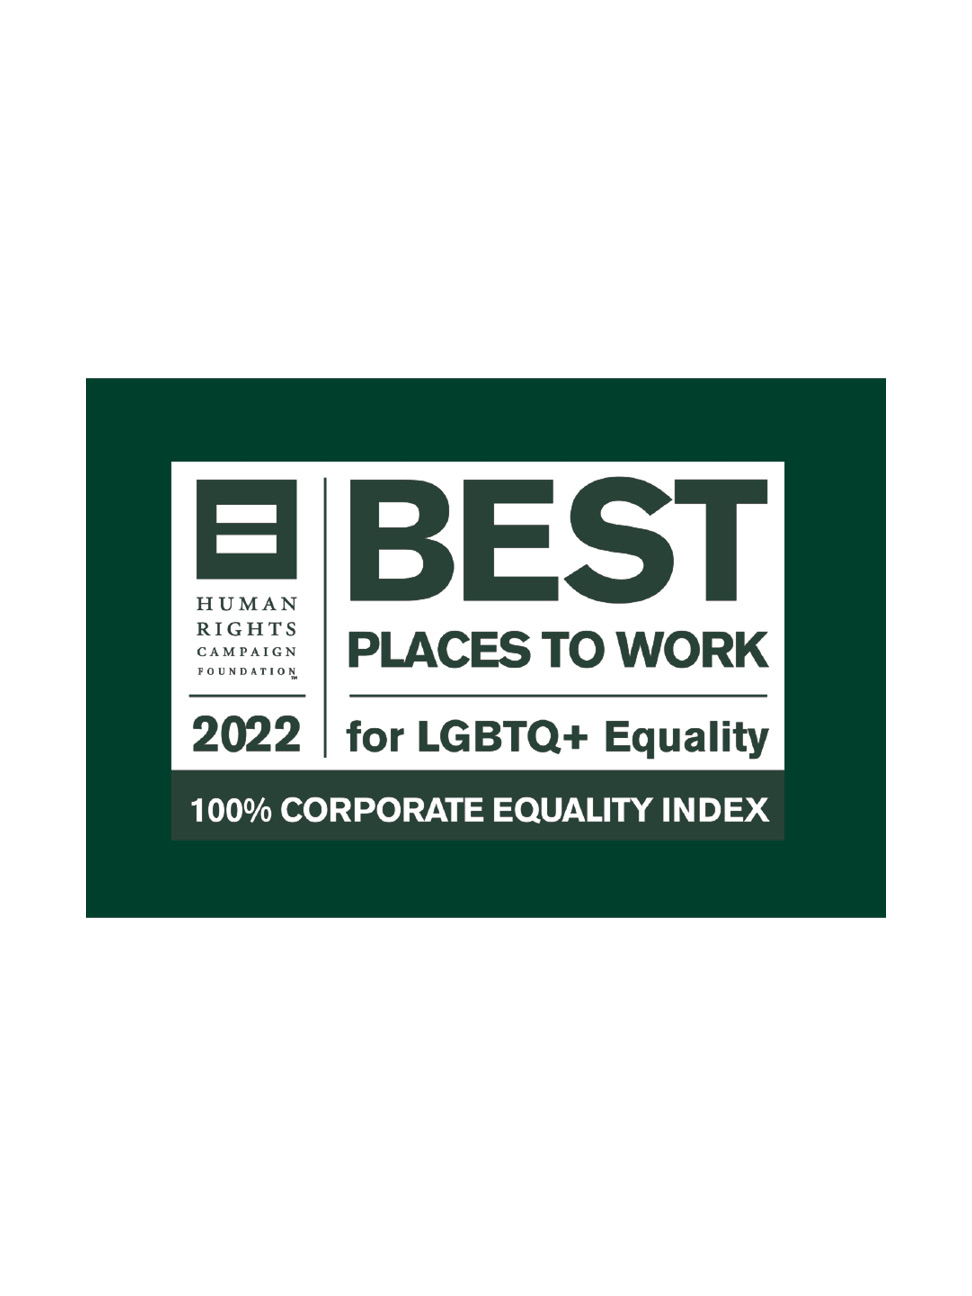 HRC Best Places to Work for LGBTQ Equality 2022 Corporate Equality Index logo